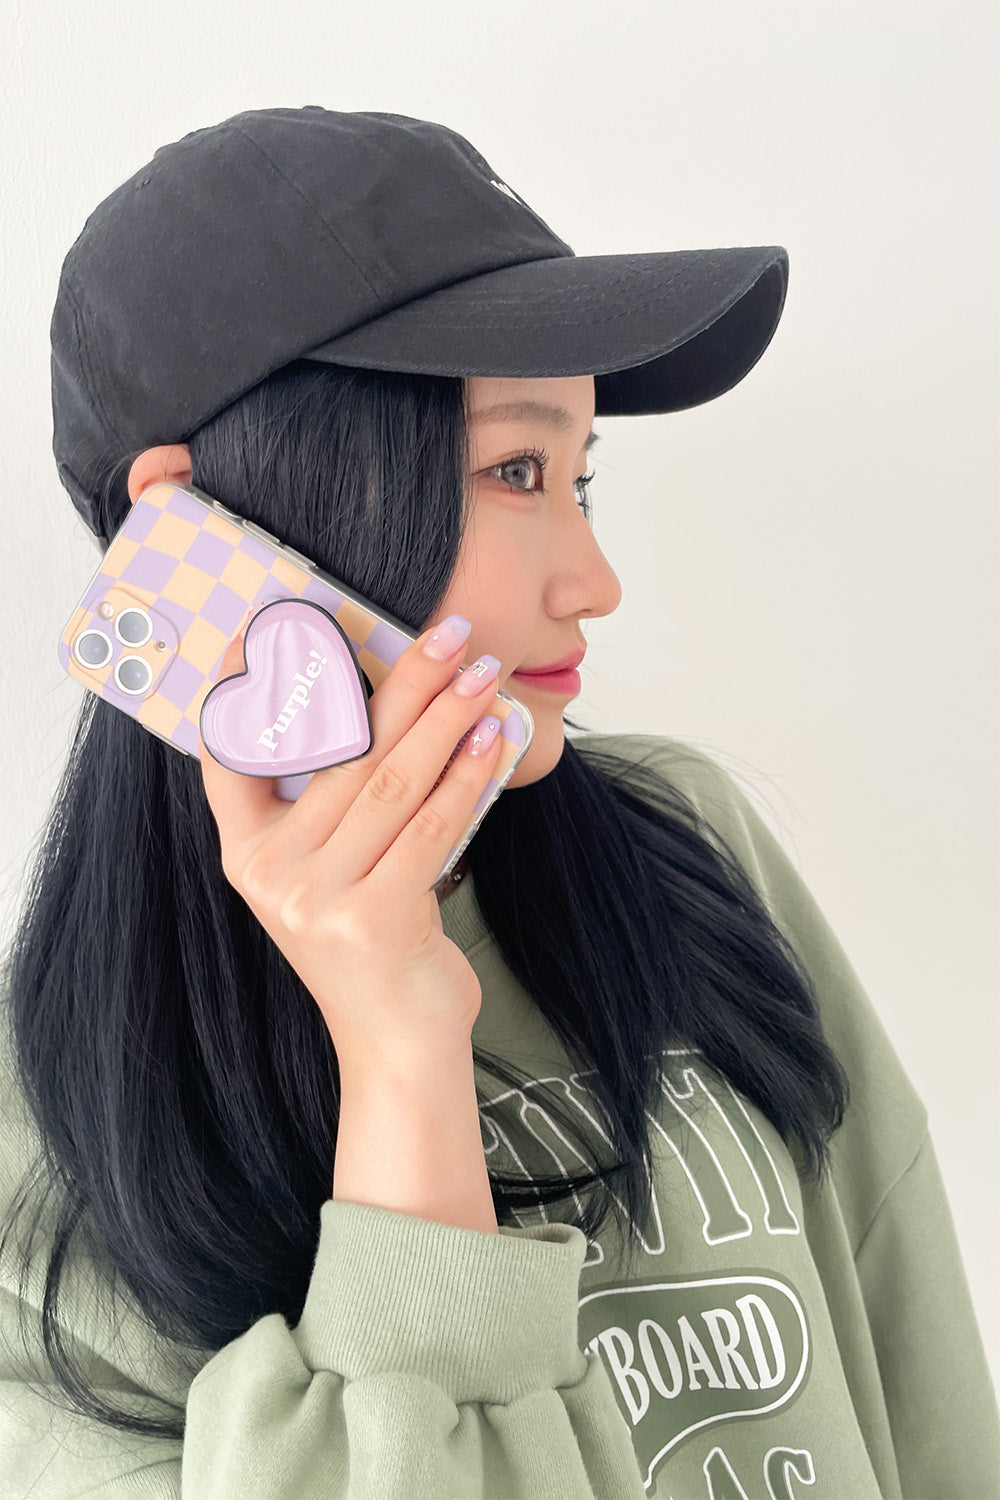 Check iPhone case(チェックアイフォンケース)